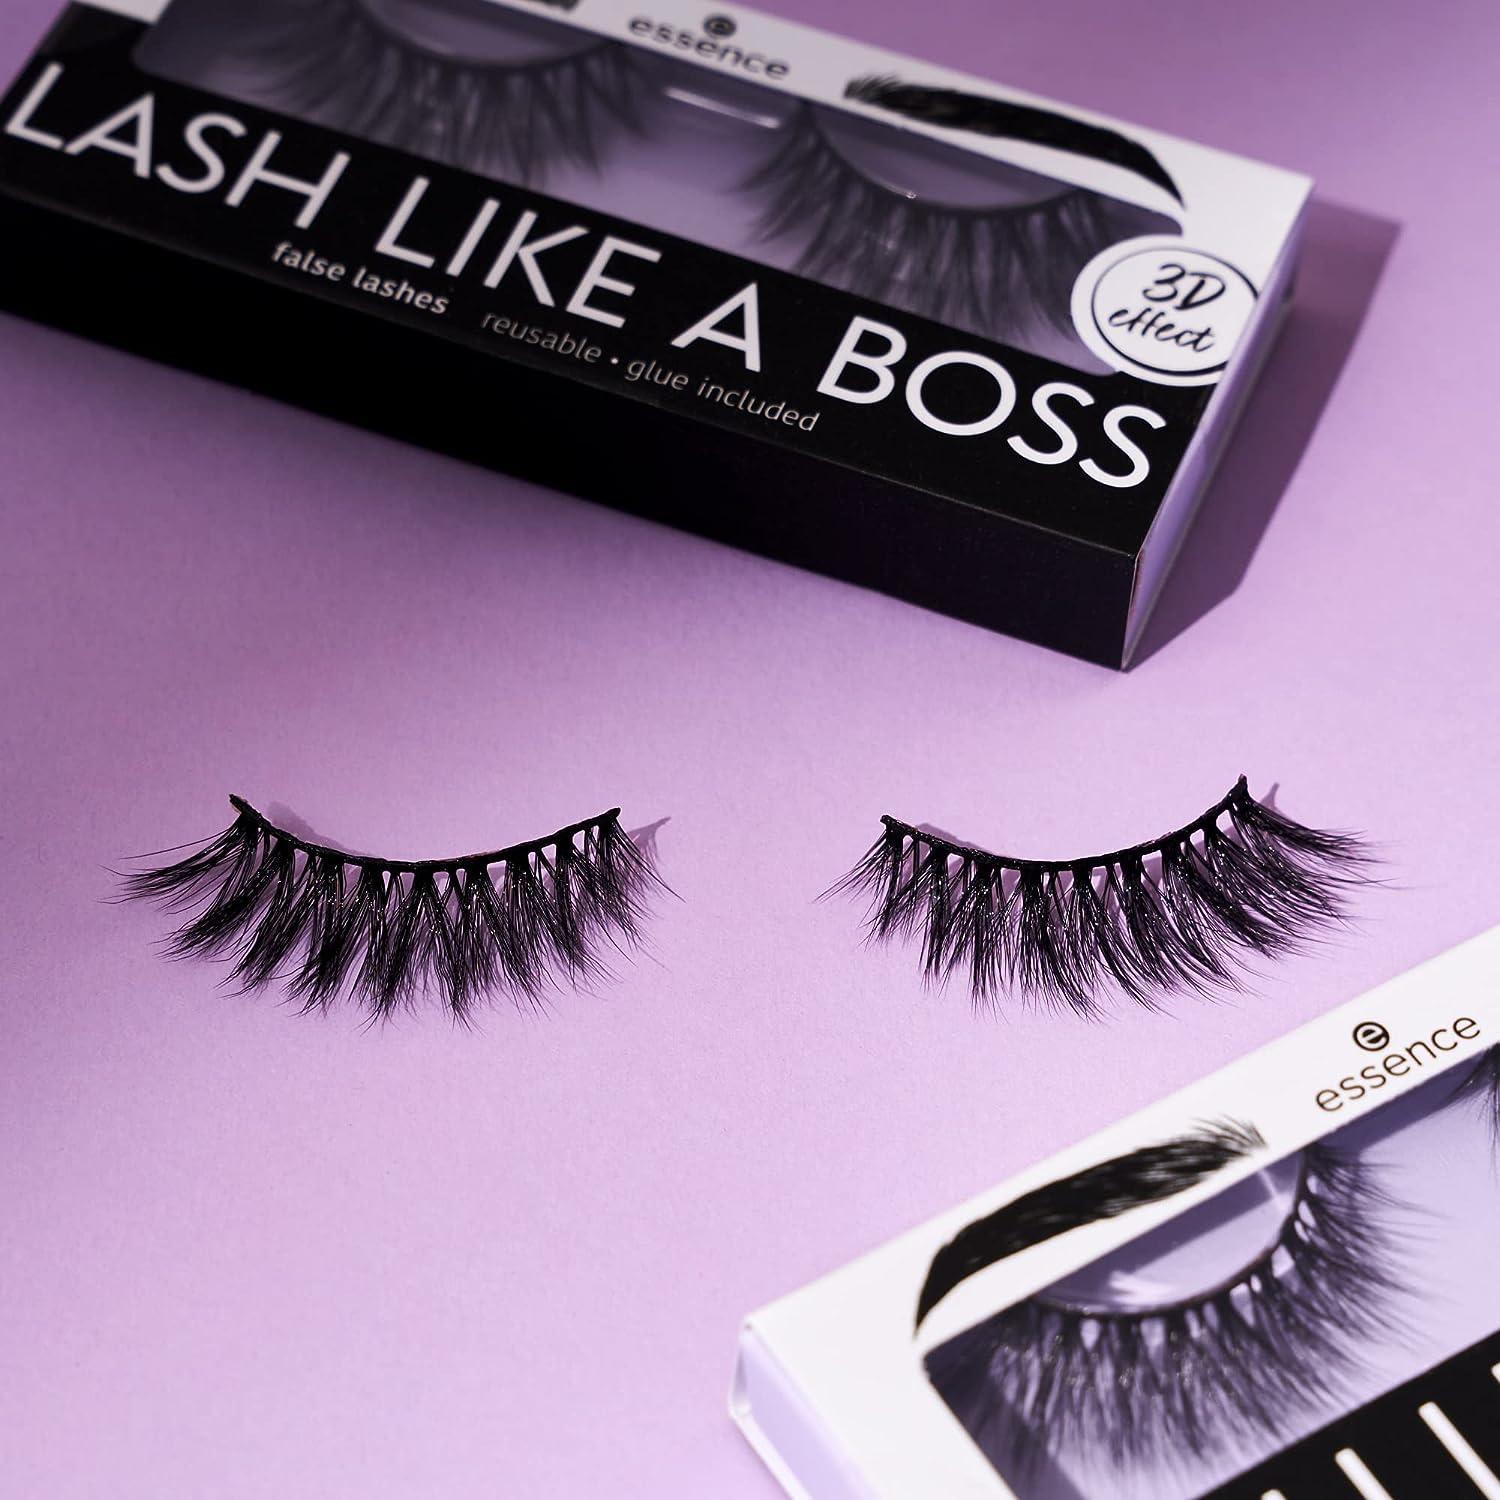 with Boss Oil | | (02 Lash Free Like & Alcohol Lash Free Lashes Cruelty A False From | Glue Reusable Long essence Parabens | 3D & Limitless) Lasting | Lashes Vegan